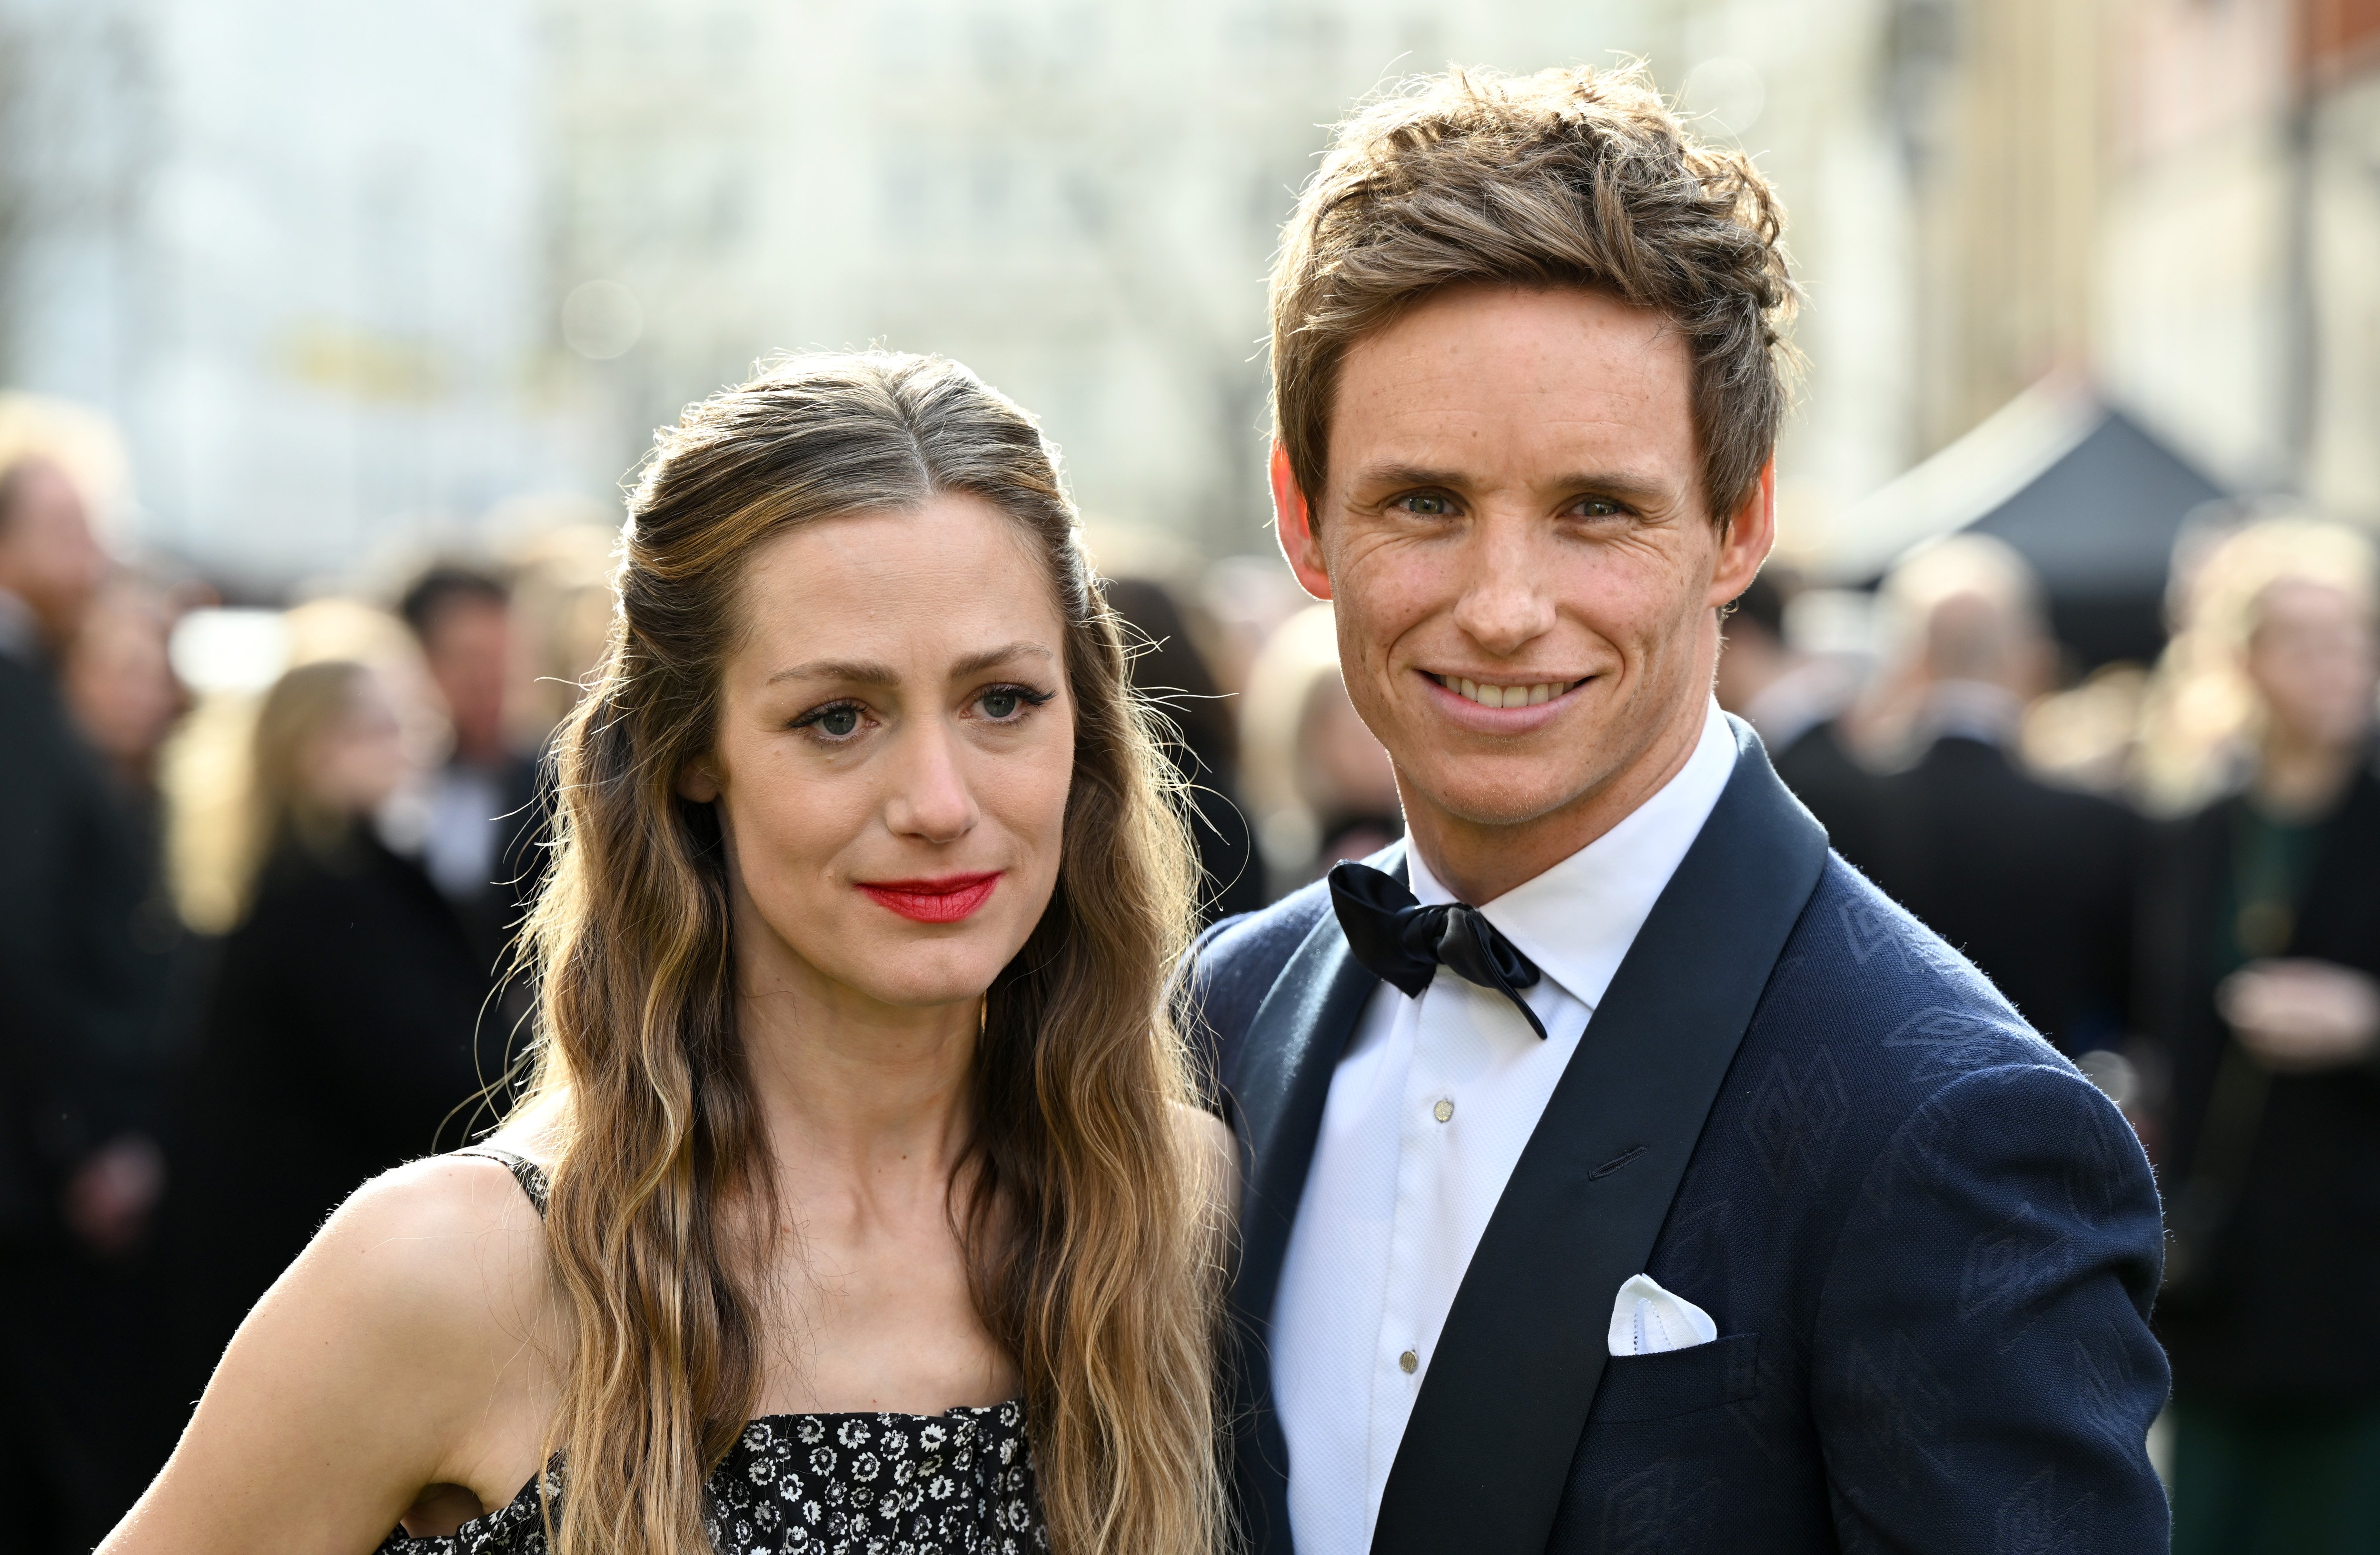 Hannah Bagshawe and Eddie Redmayne attend The Olivier Awards 2022 with MasterCard at the Royal Albert Hall on April 10, 2022 in London, England. | Source: Getty Images